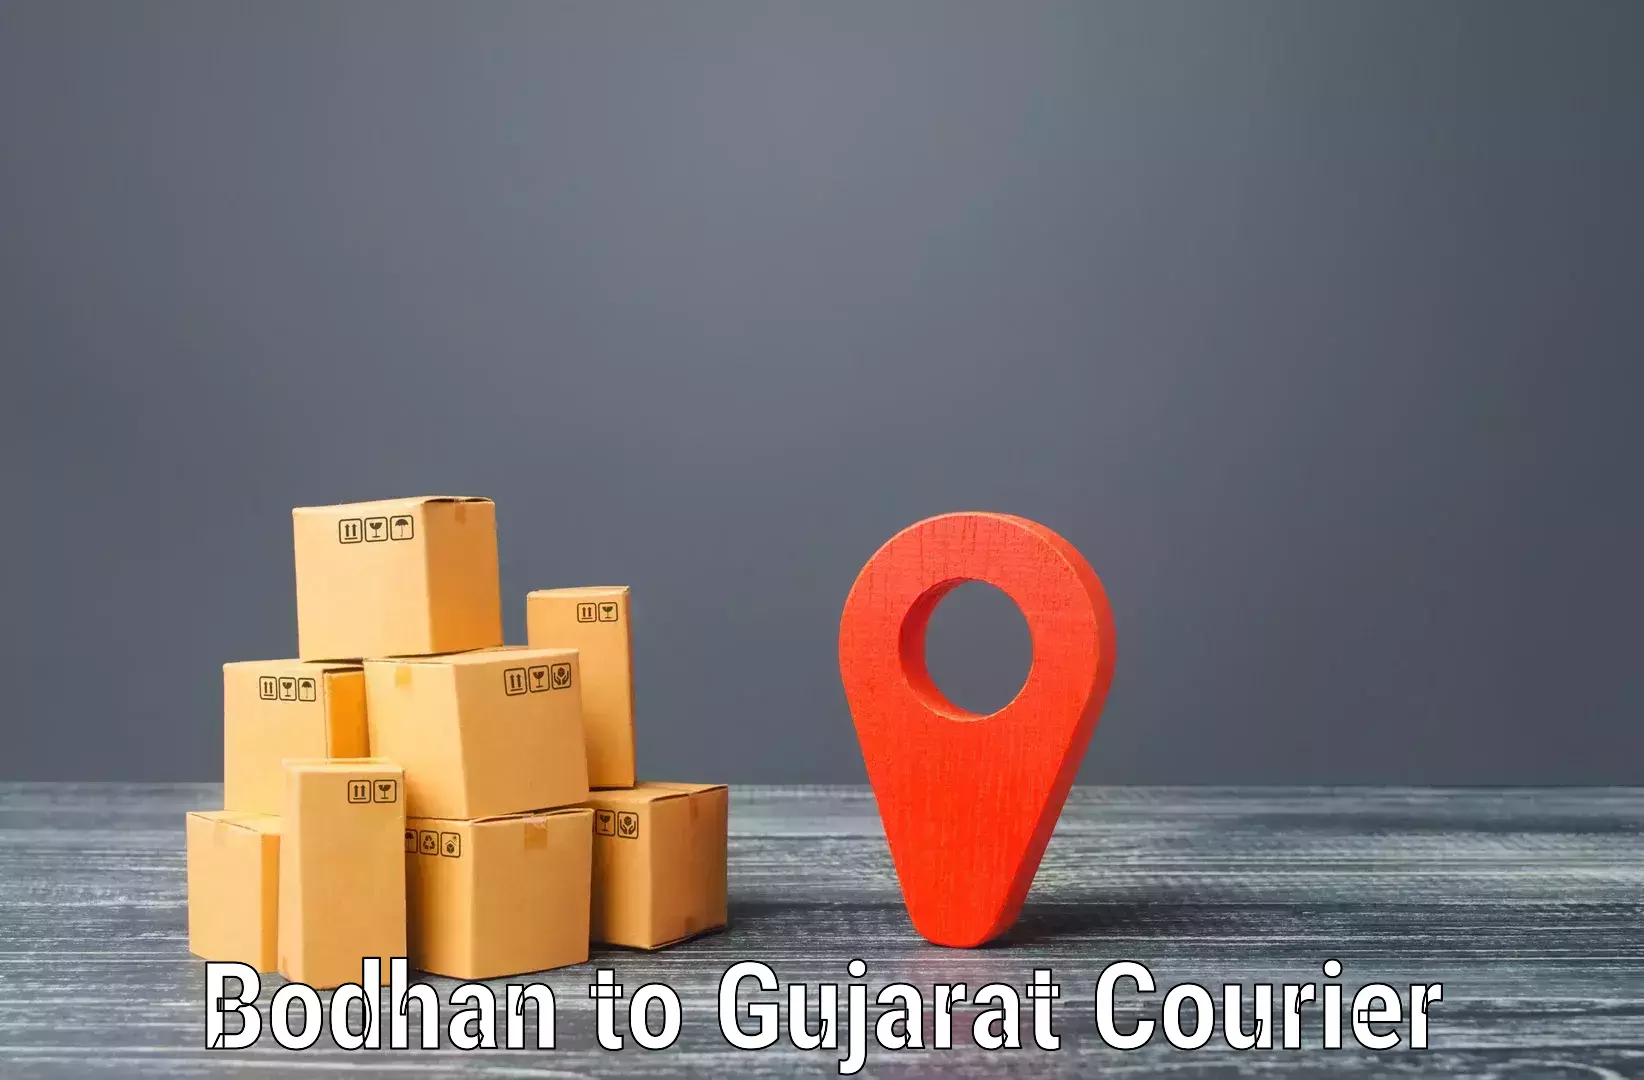 Nationwide courier service Bodhan to Ahmedabad